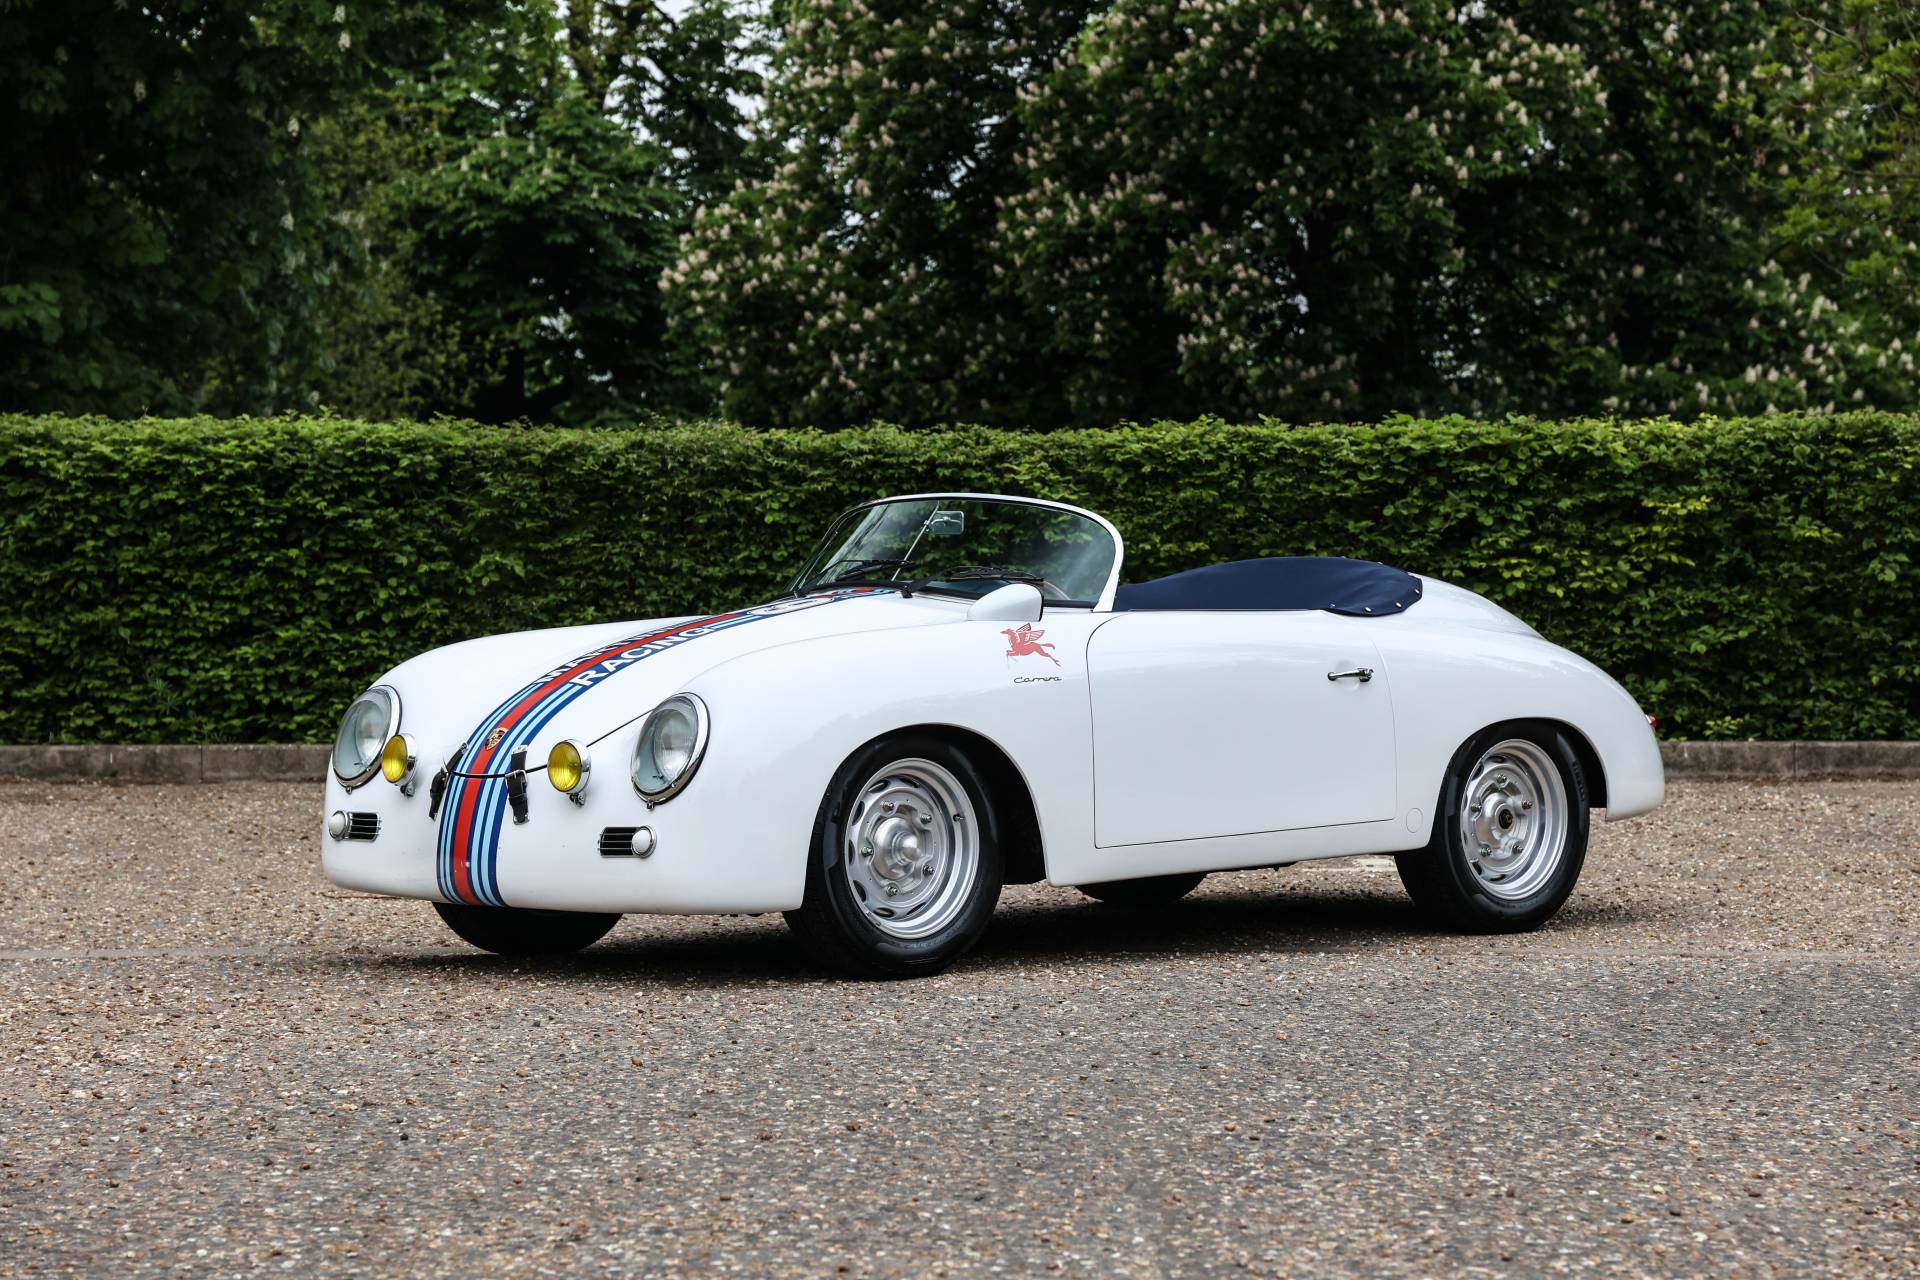 For Sale: Porsche 356 Carrera Speedster Tribute (1960) offered for GBP  70,000